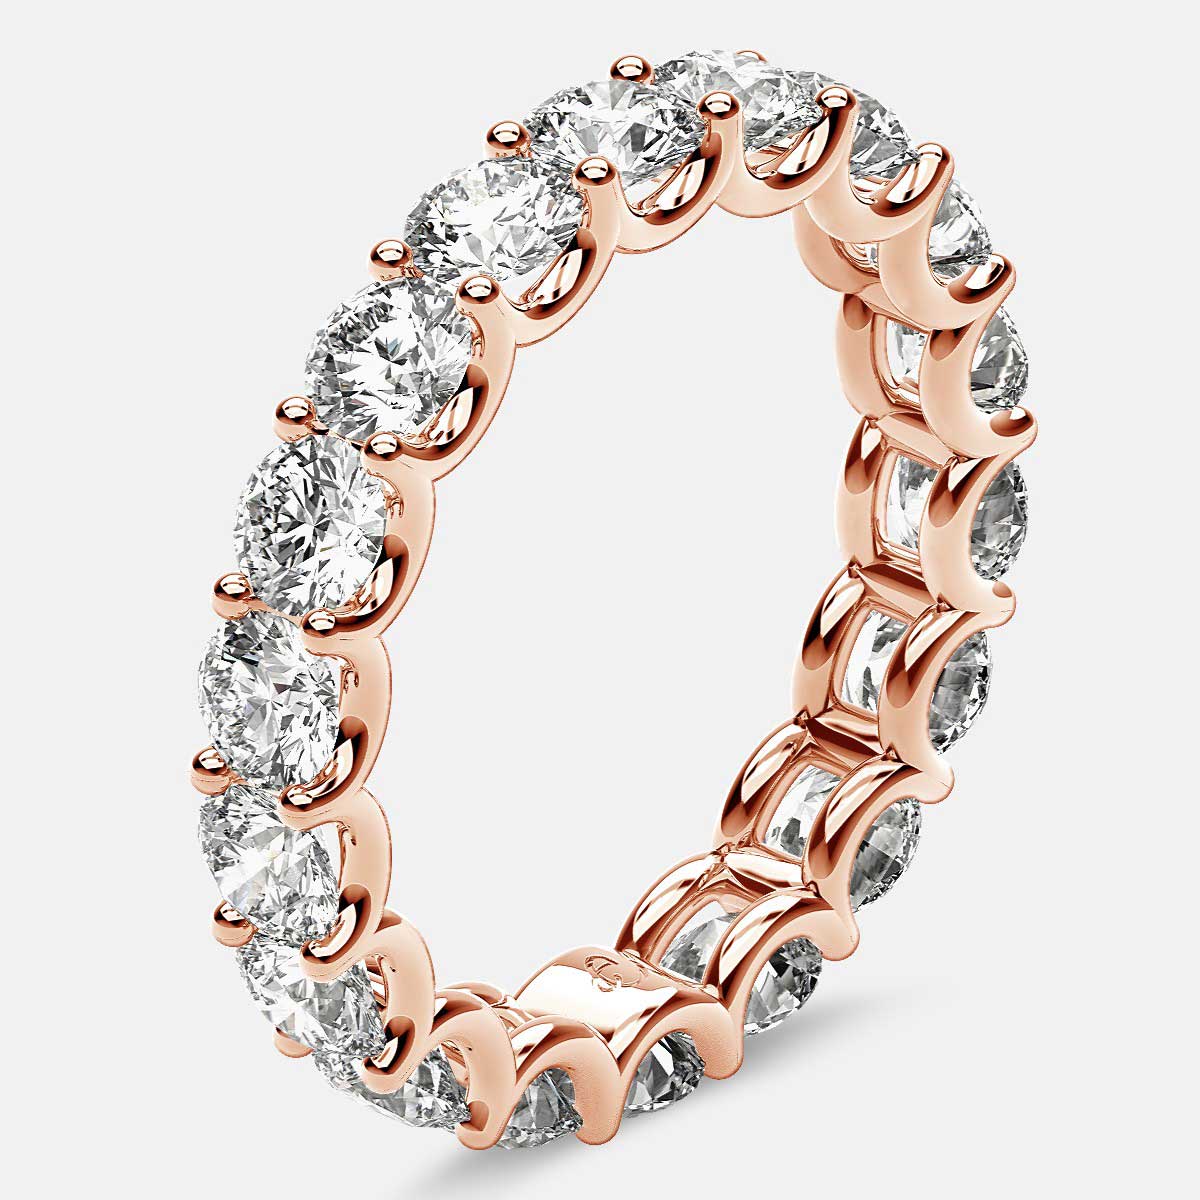 Eternity Ring with Arch Prong Set Round Diamonds in 18k Rose Gold